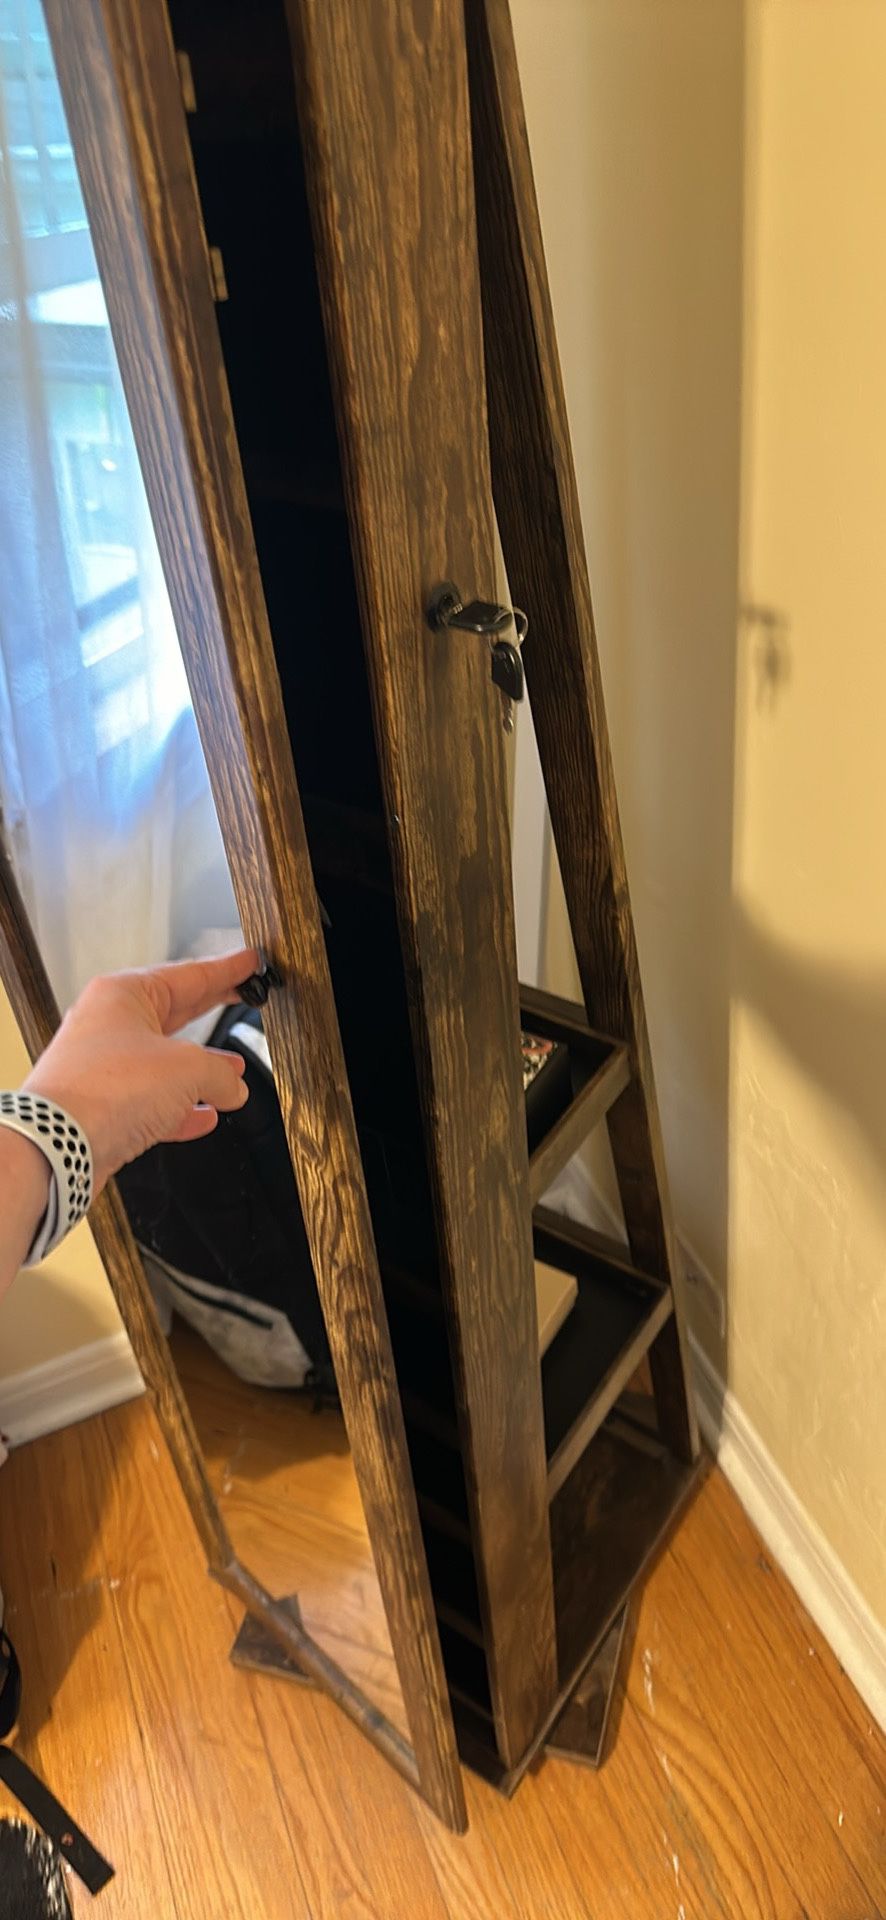 Jewelry Cabinet With Lock And Stand Alone Mirror 